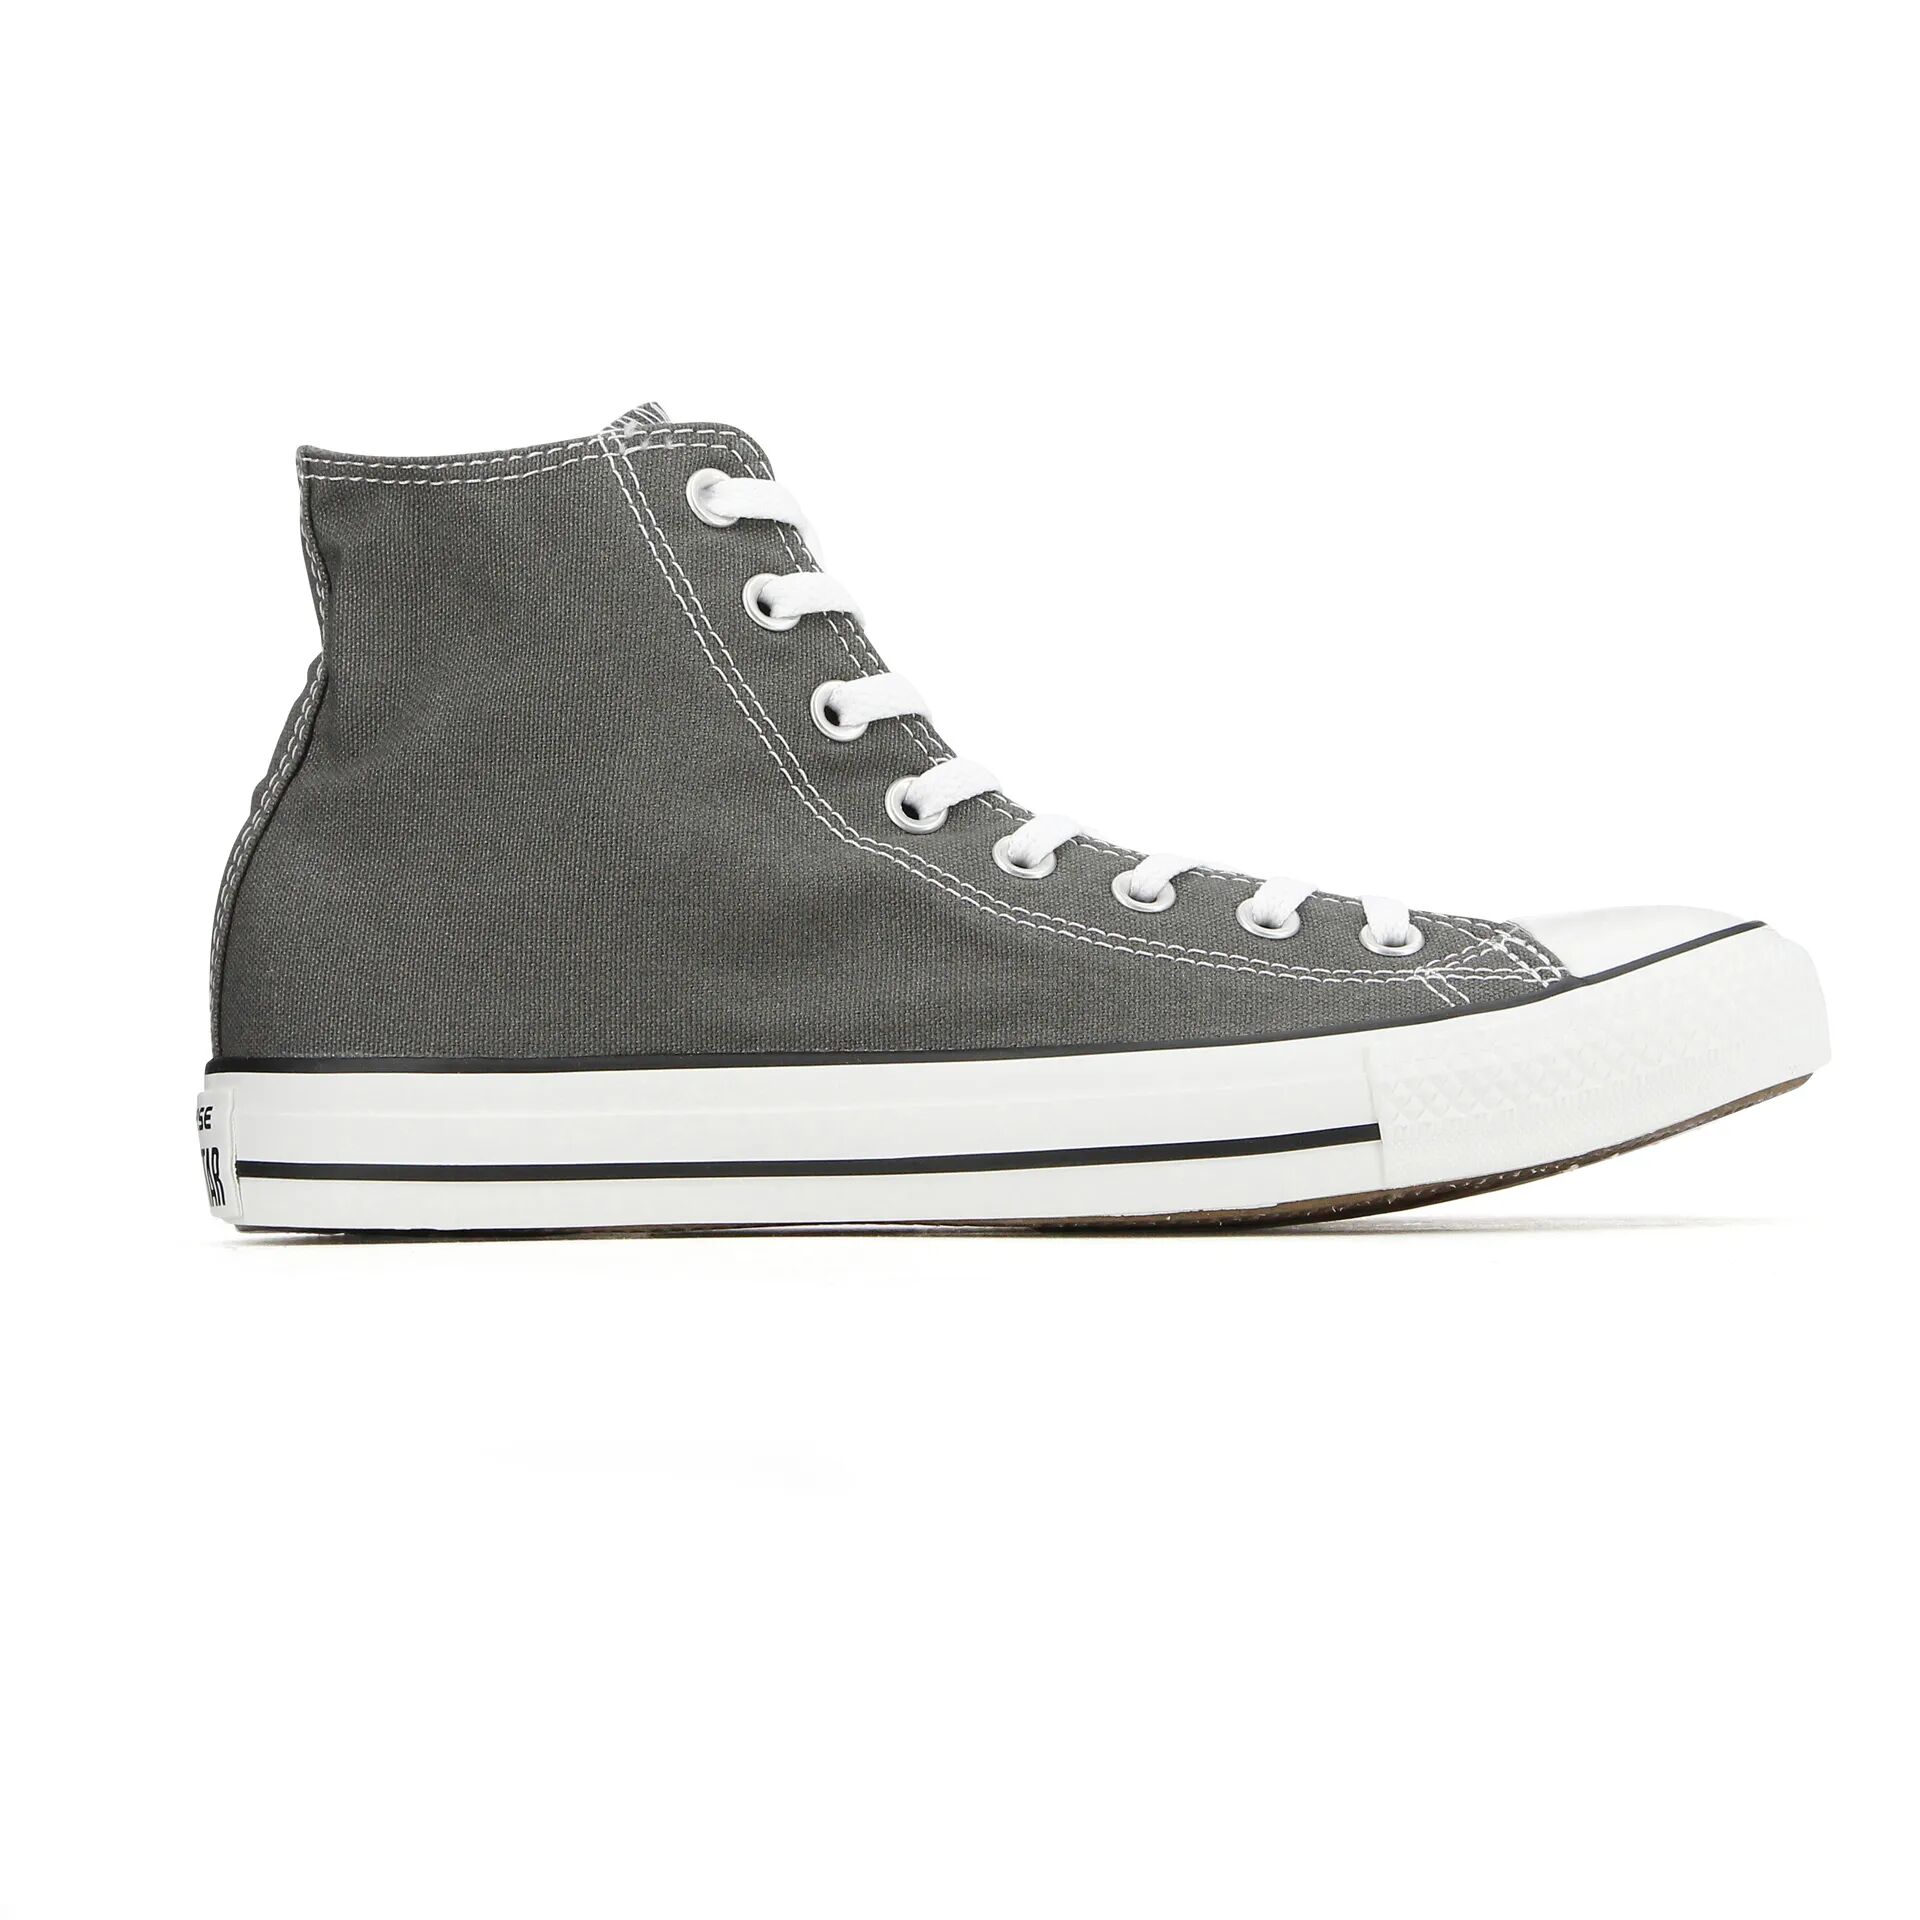 Converse Chuck Taylor All Star Hi Core Charcoal gris 43 homme